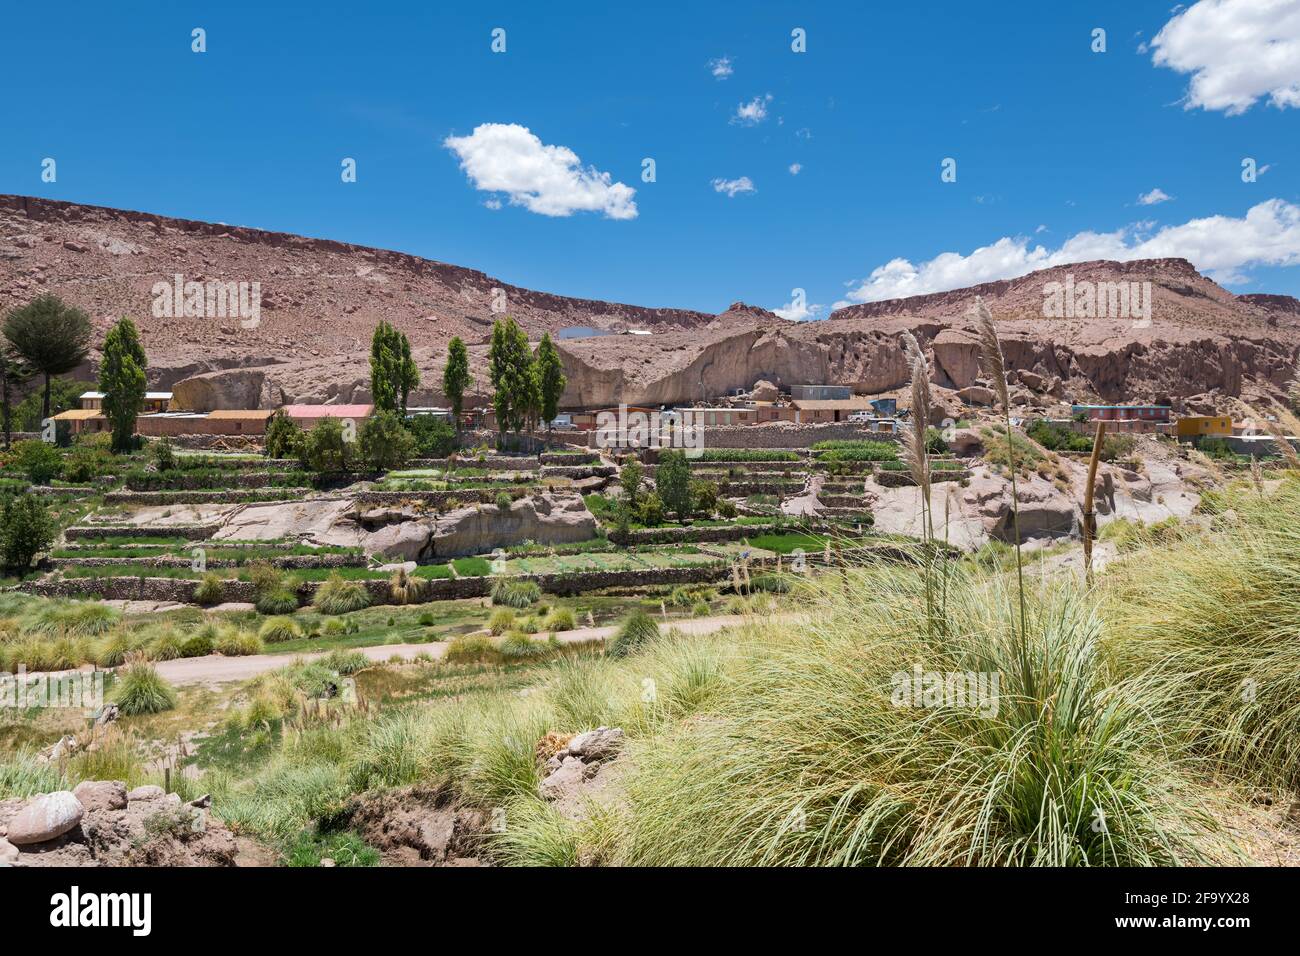 A view of Caspana, a little village in an oasis in the Atacama desert in northern Chile. Stock Photo